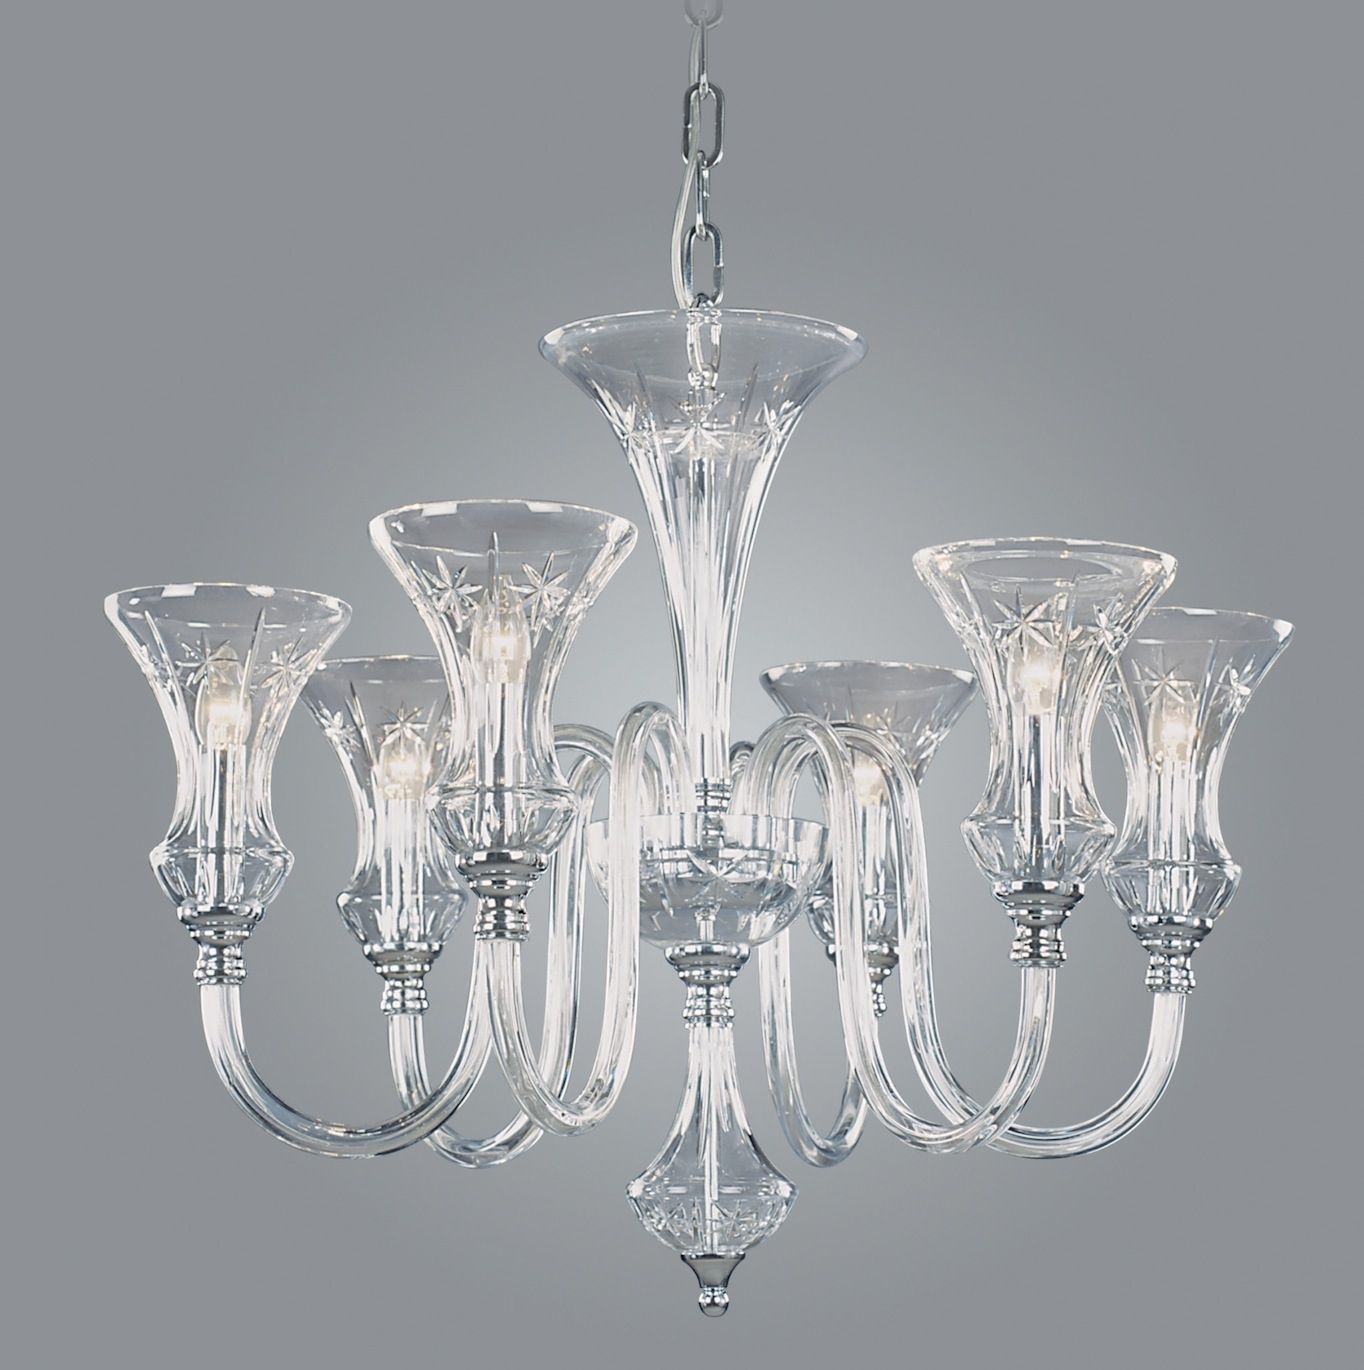 Modern Glass Chandeliers Pertaining To Modern Glass Chandeliers (View 11 of 12)